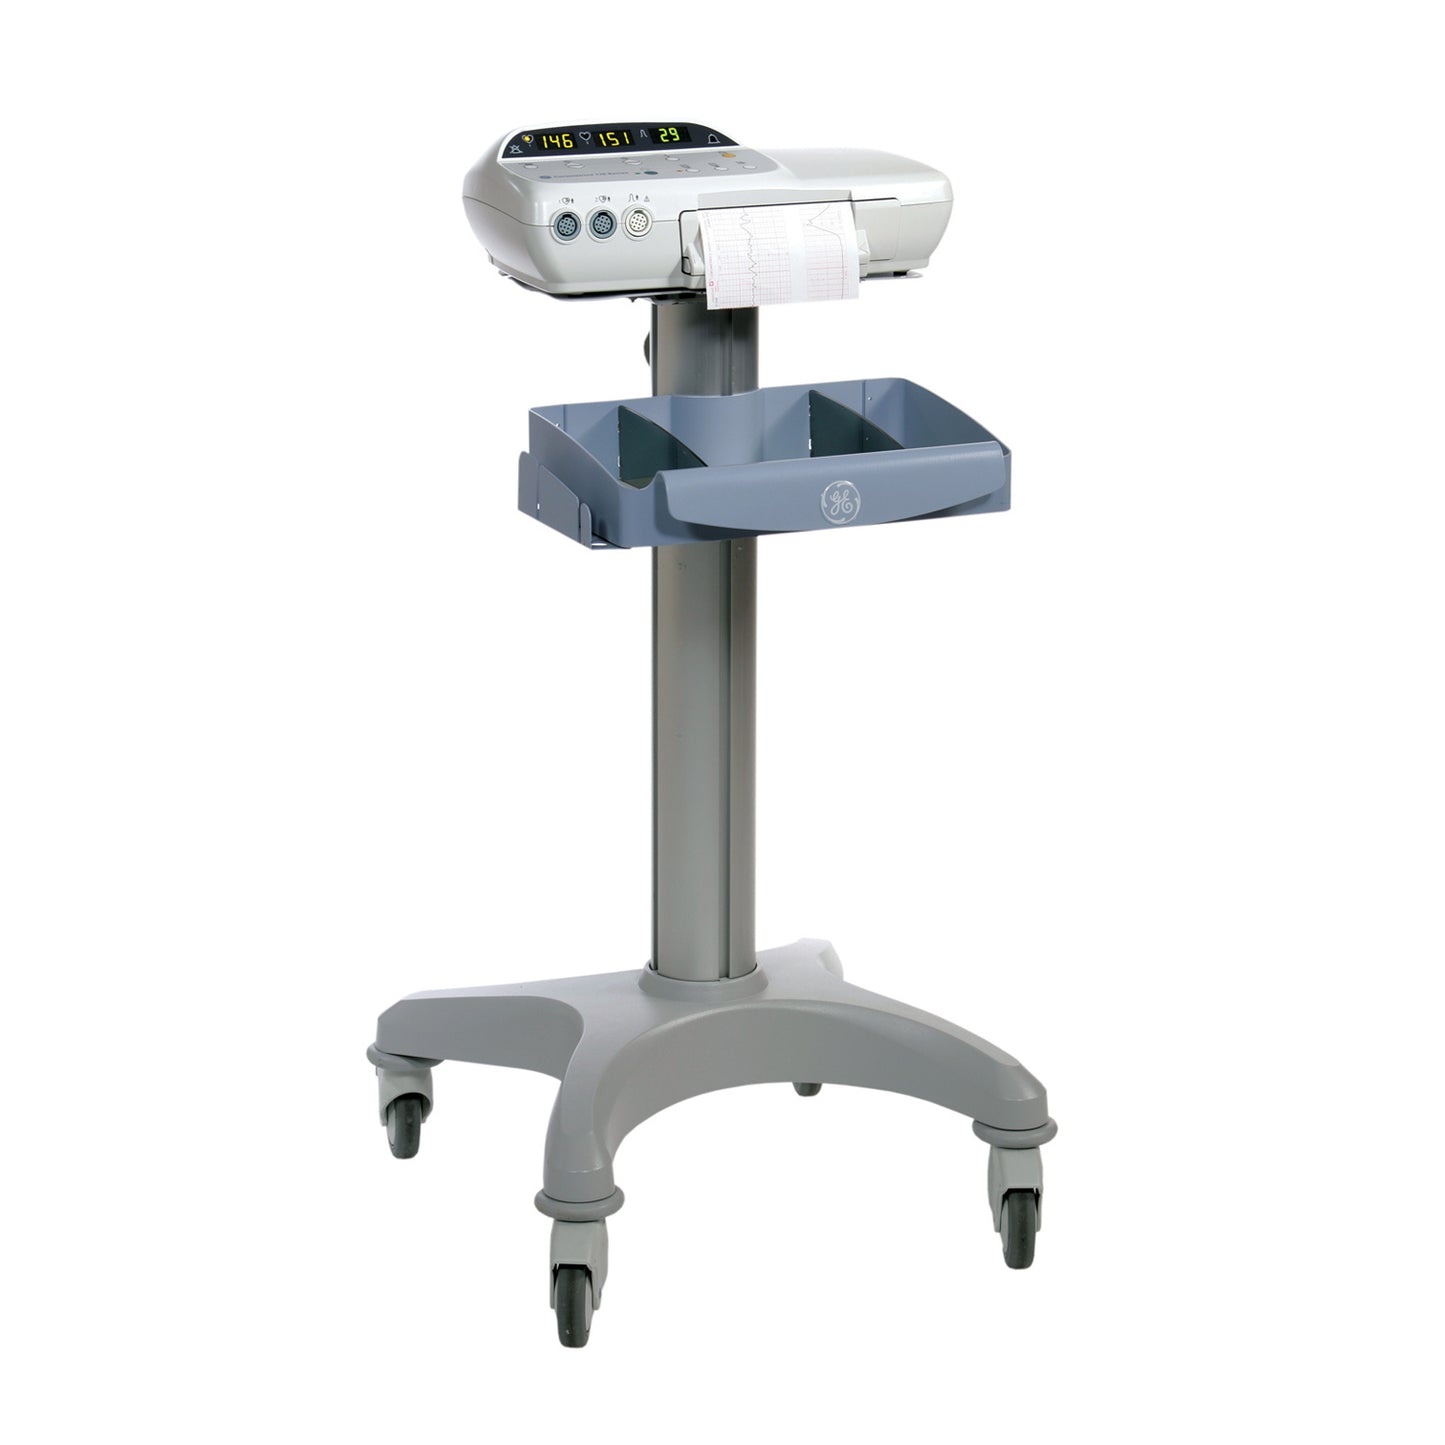 Ge Corometrics® Instrument Trolley For Flexible Use Of Ge Ctg 170 Series Instruments